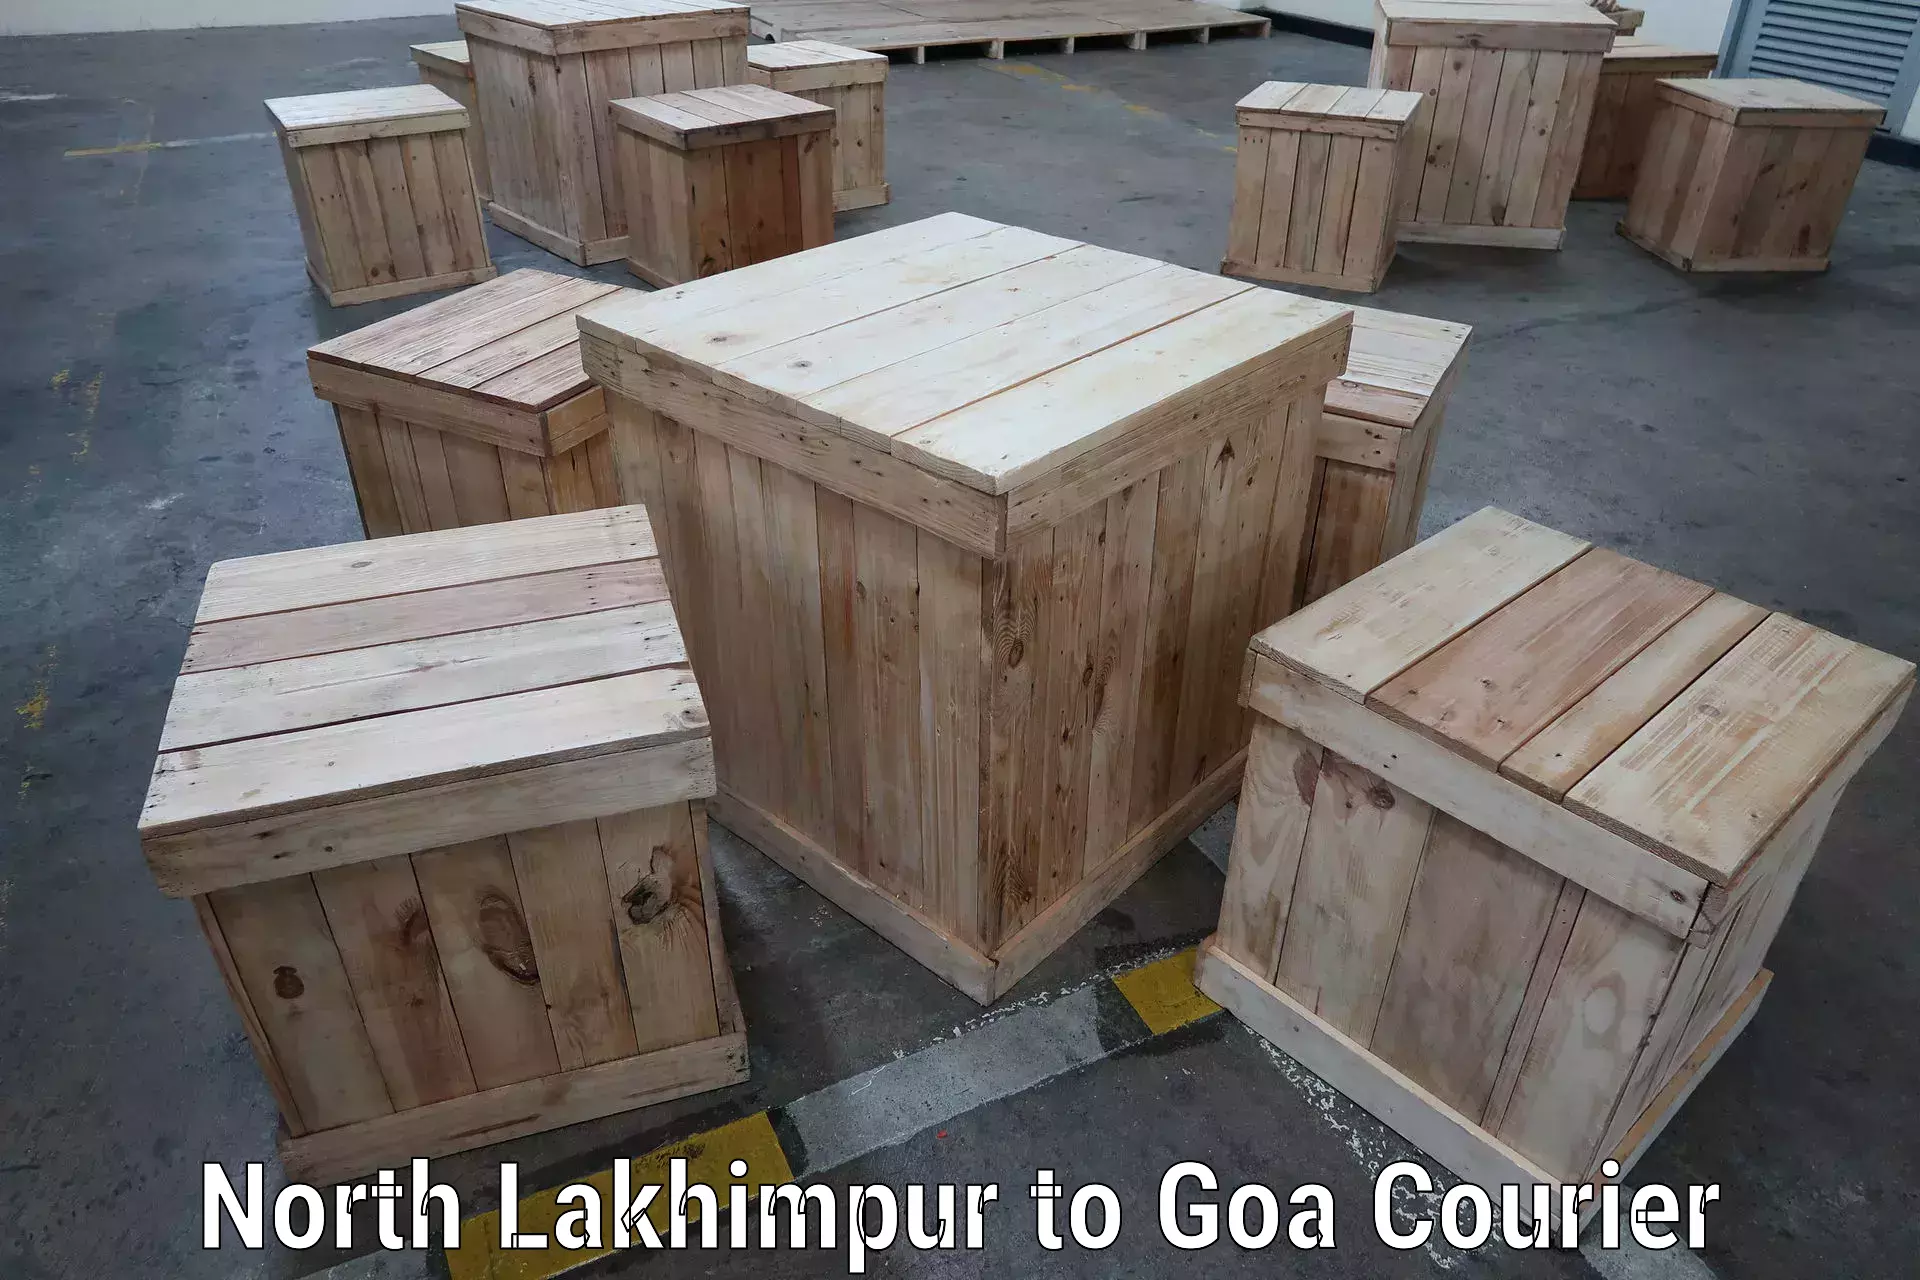 High-speed parcel service North Lakhimpur to Goa